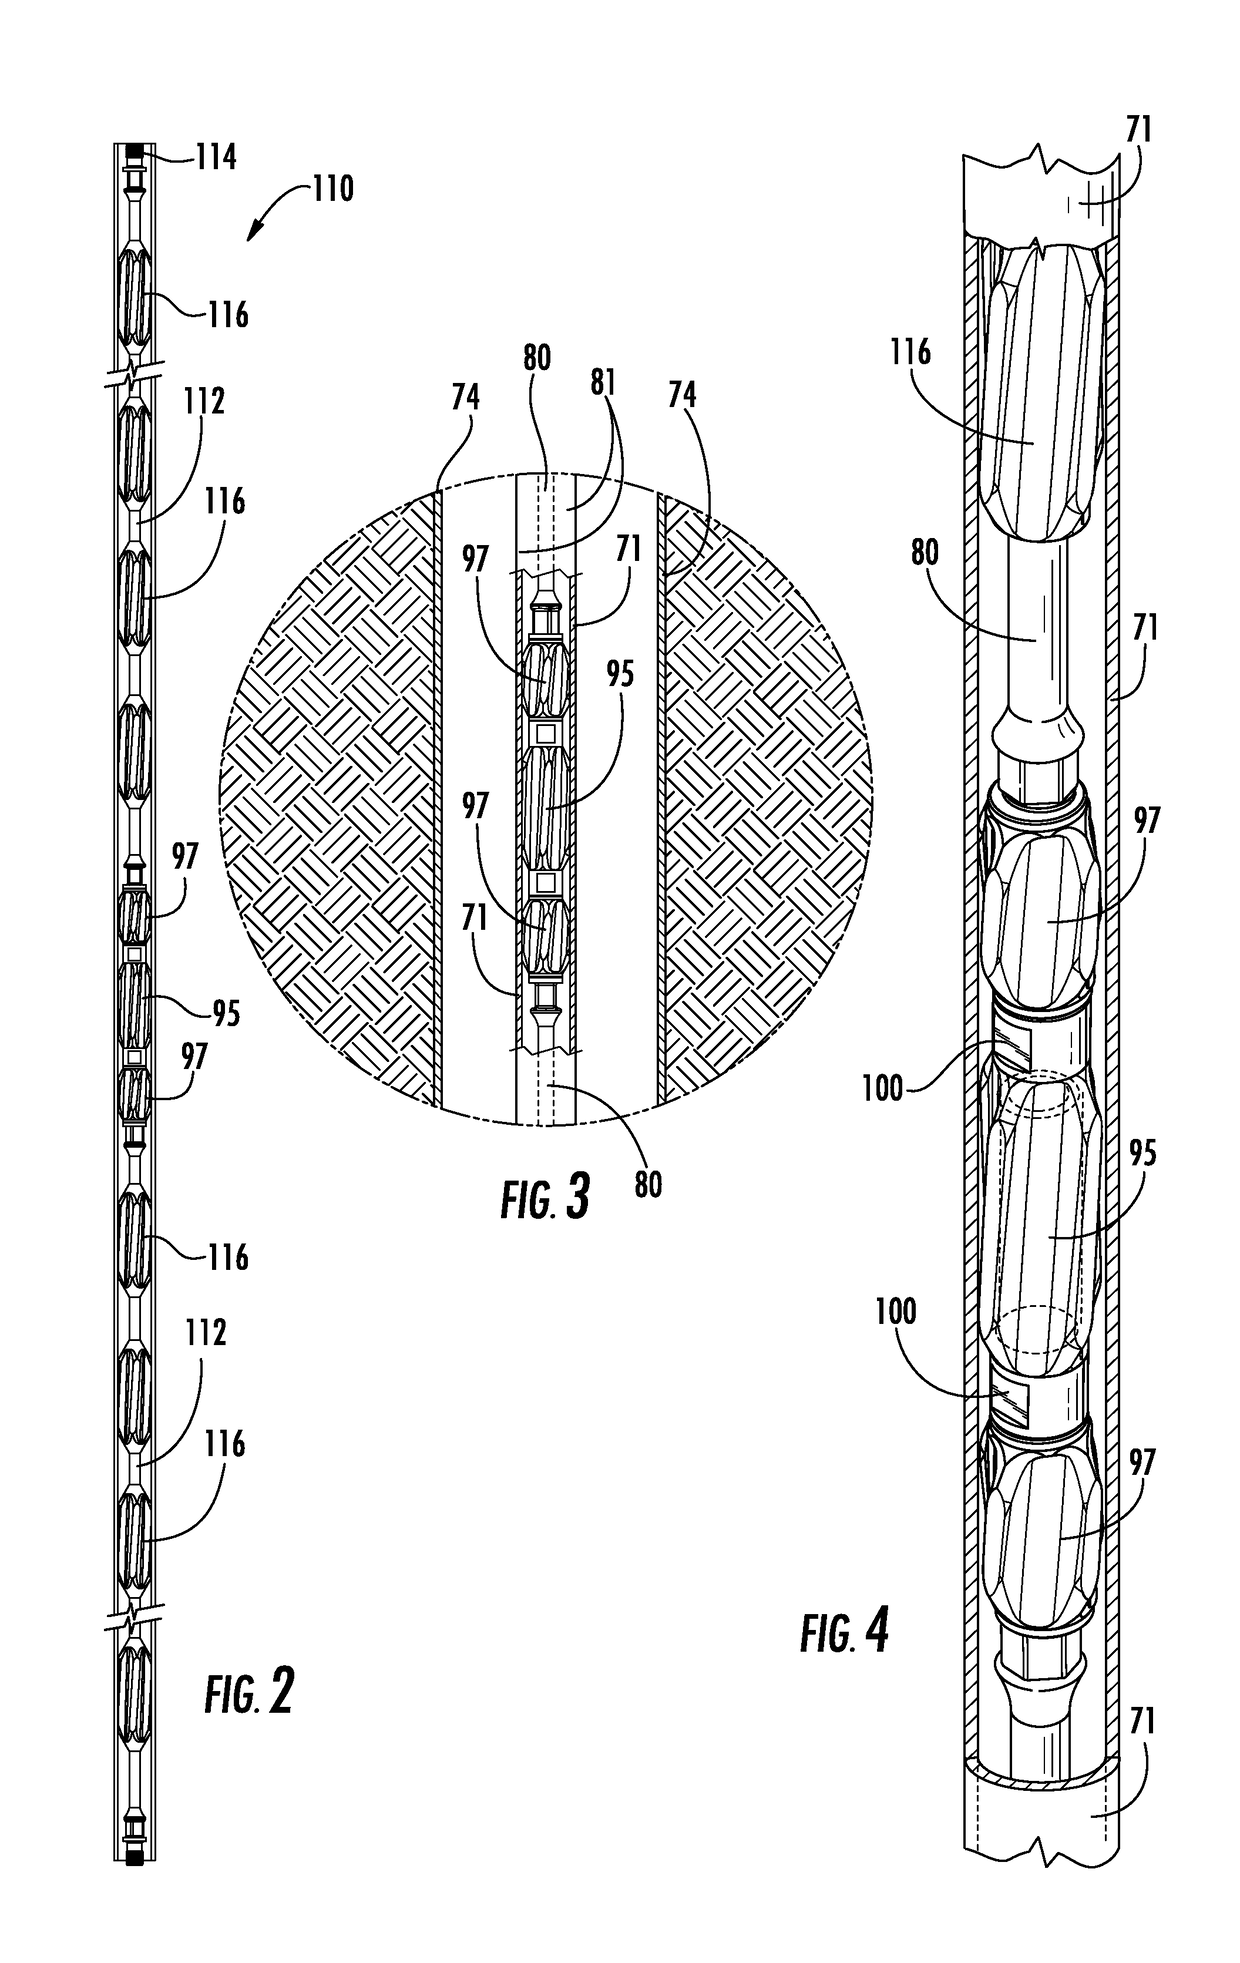 Sucker rod apparatus and methods for manufacture and use